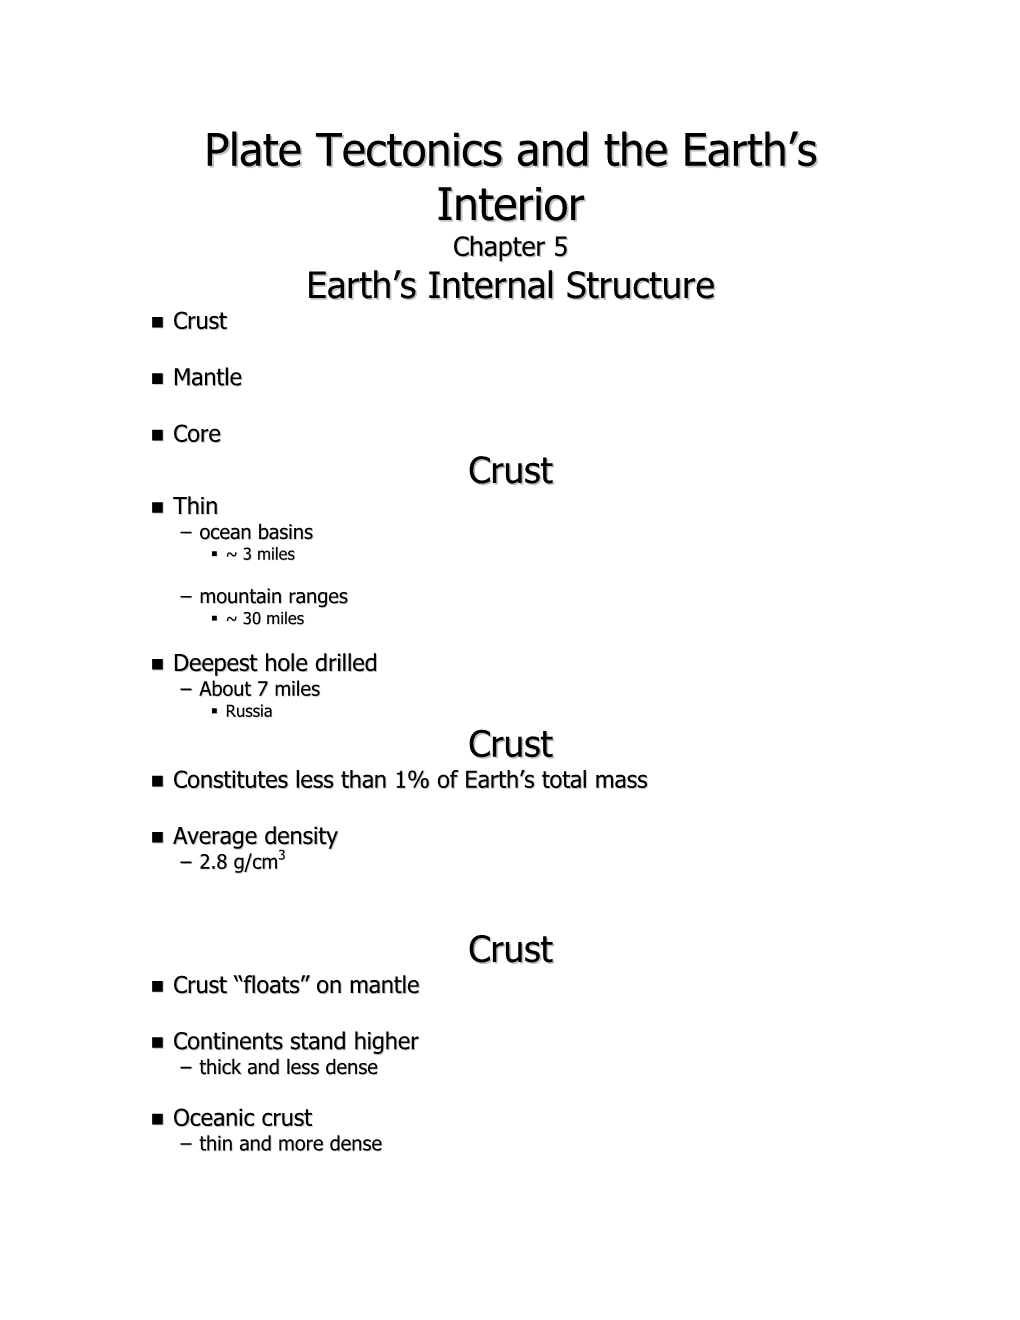 Plate Tectonics and the Earth's Interior